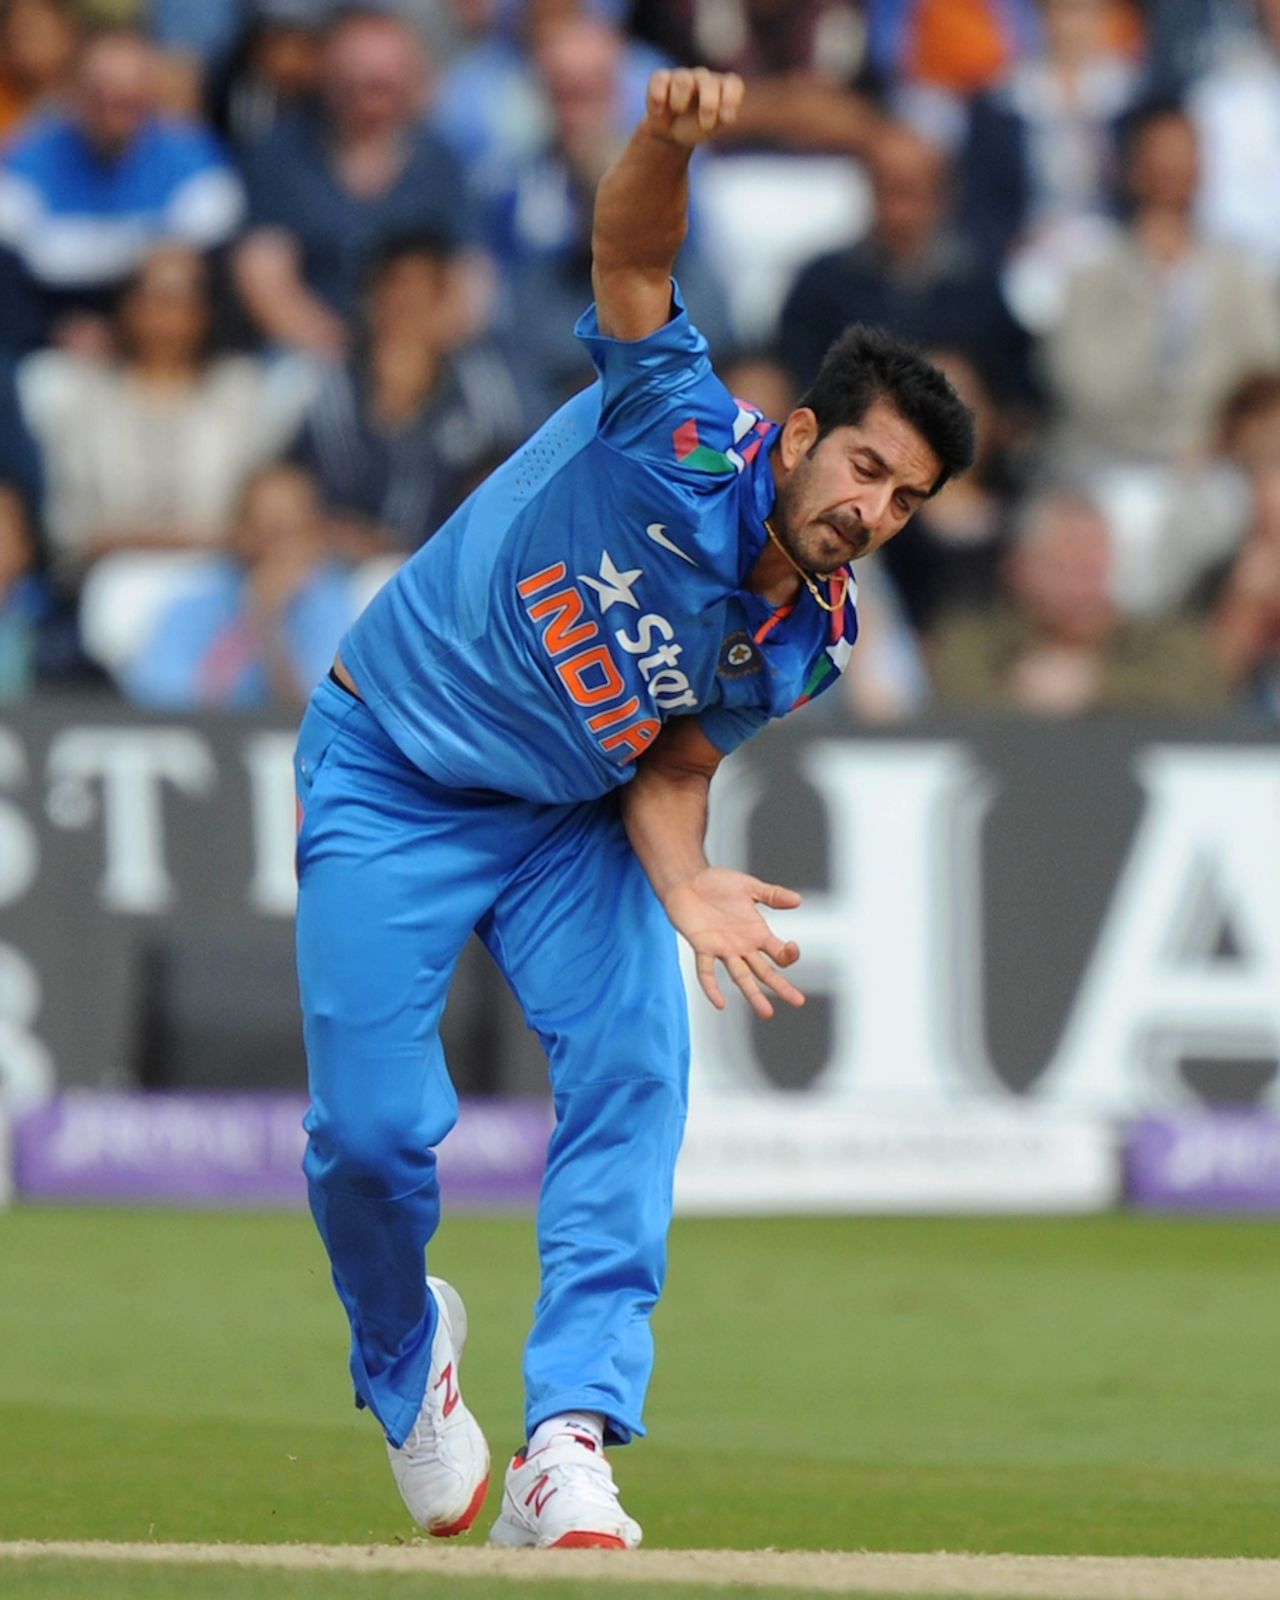 Mohit Sharma bowled three overs before getting injured, England v India, 3rd ODI, Trent Bridge, August 30, 2014